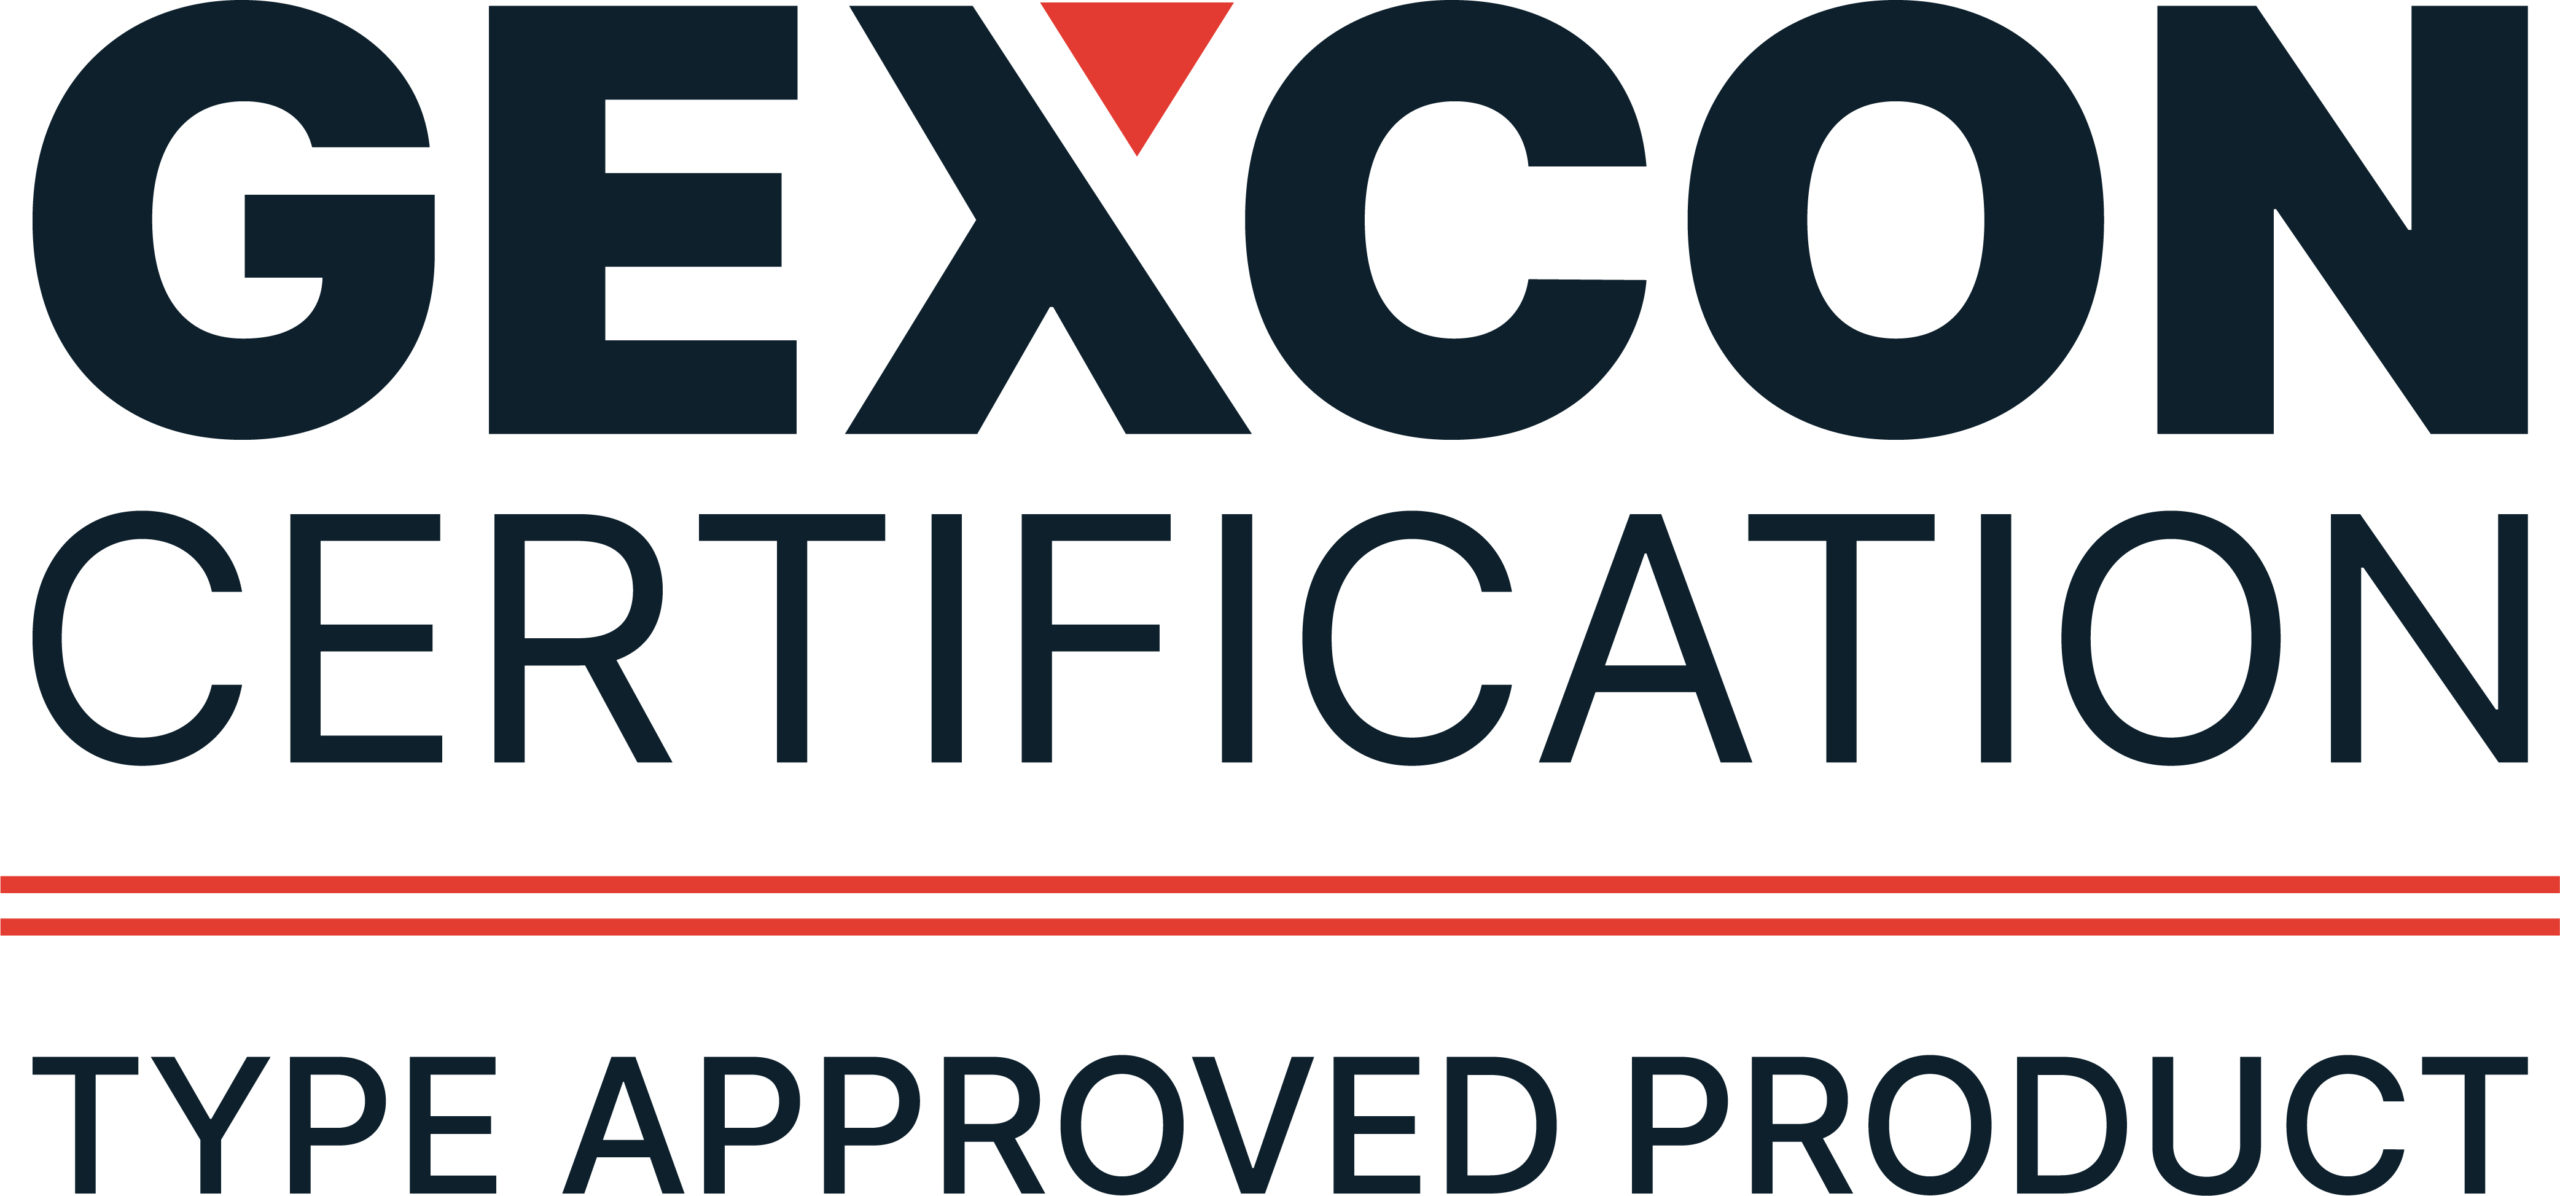 Gexcon Certification Approved Product